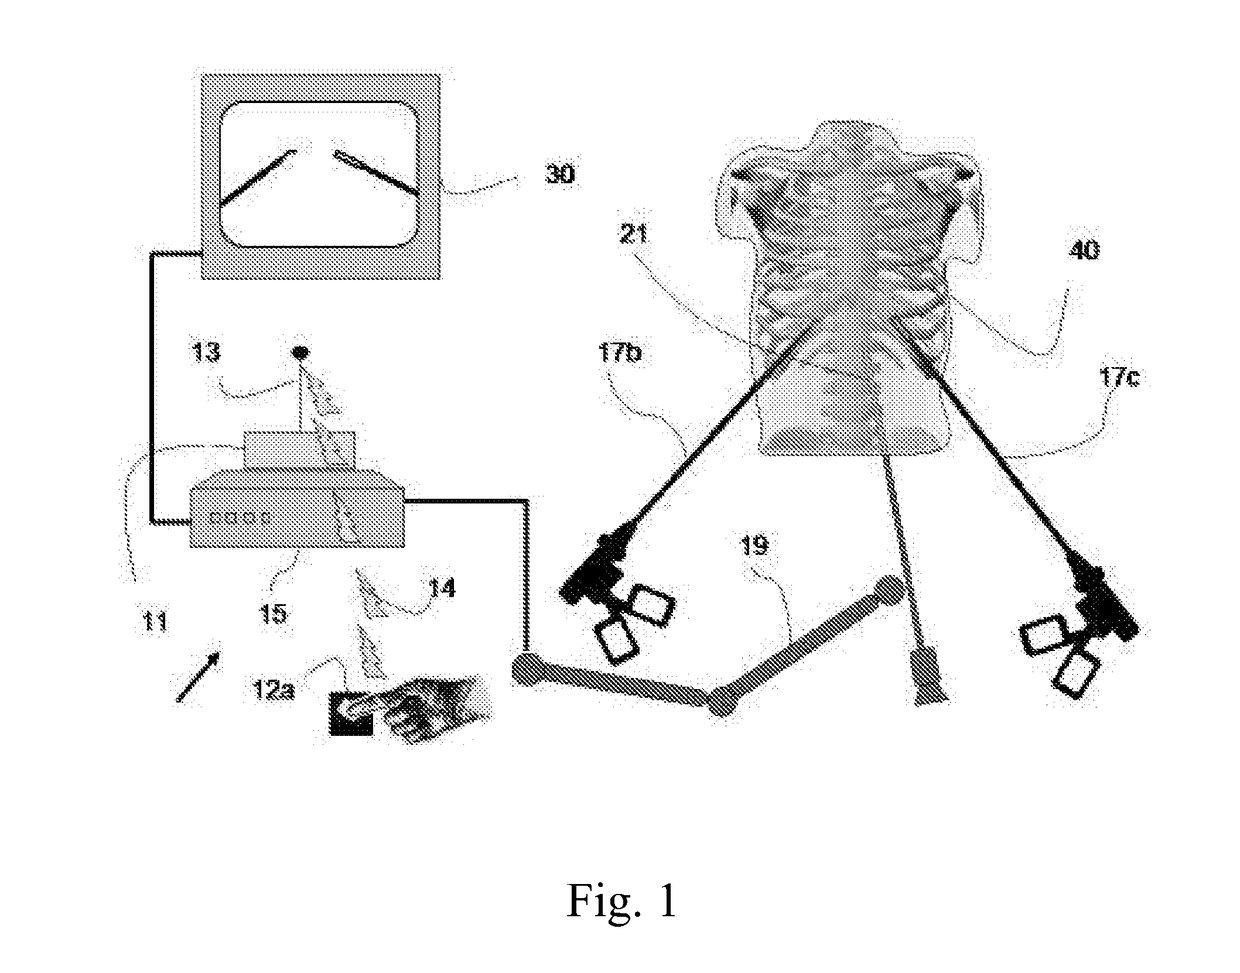 Device and method for assisting laparoscopic surgery utilizing a touch screen